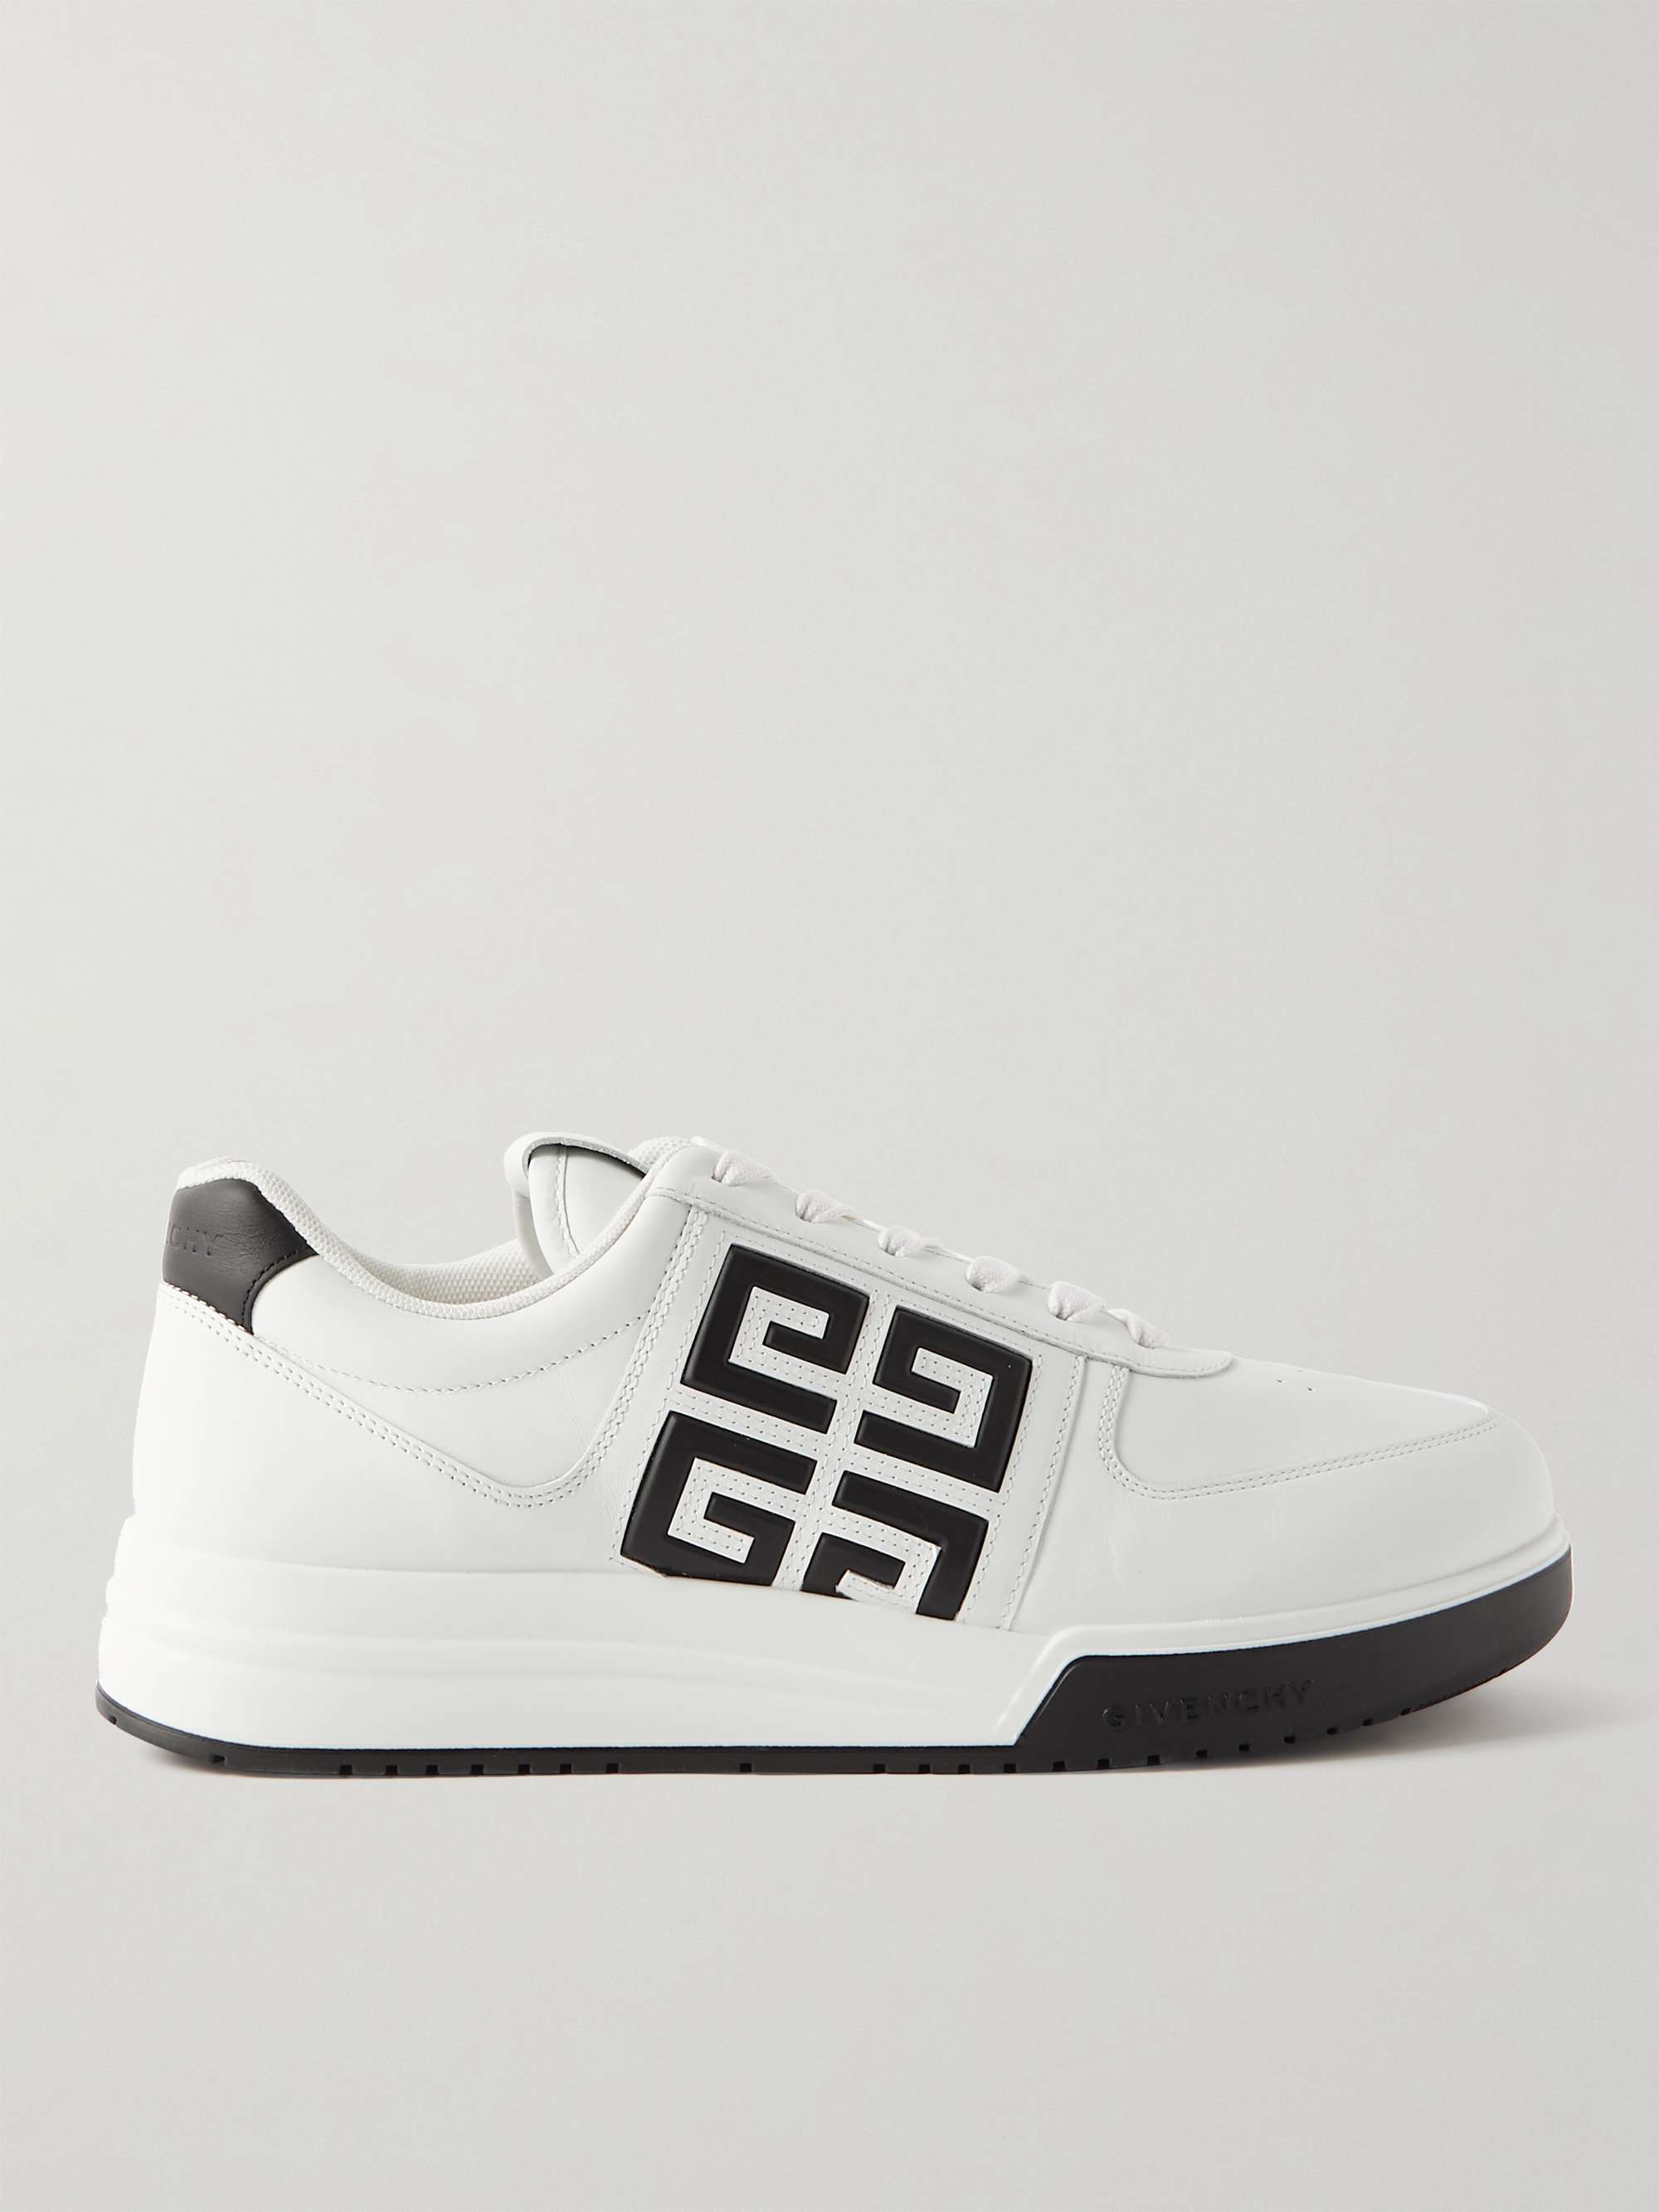 GIVENCHY G4 Logo-Embossed Leather Sneakers for Men | MR PORTER